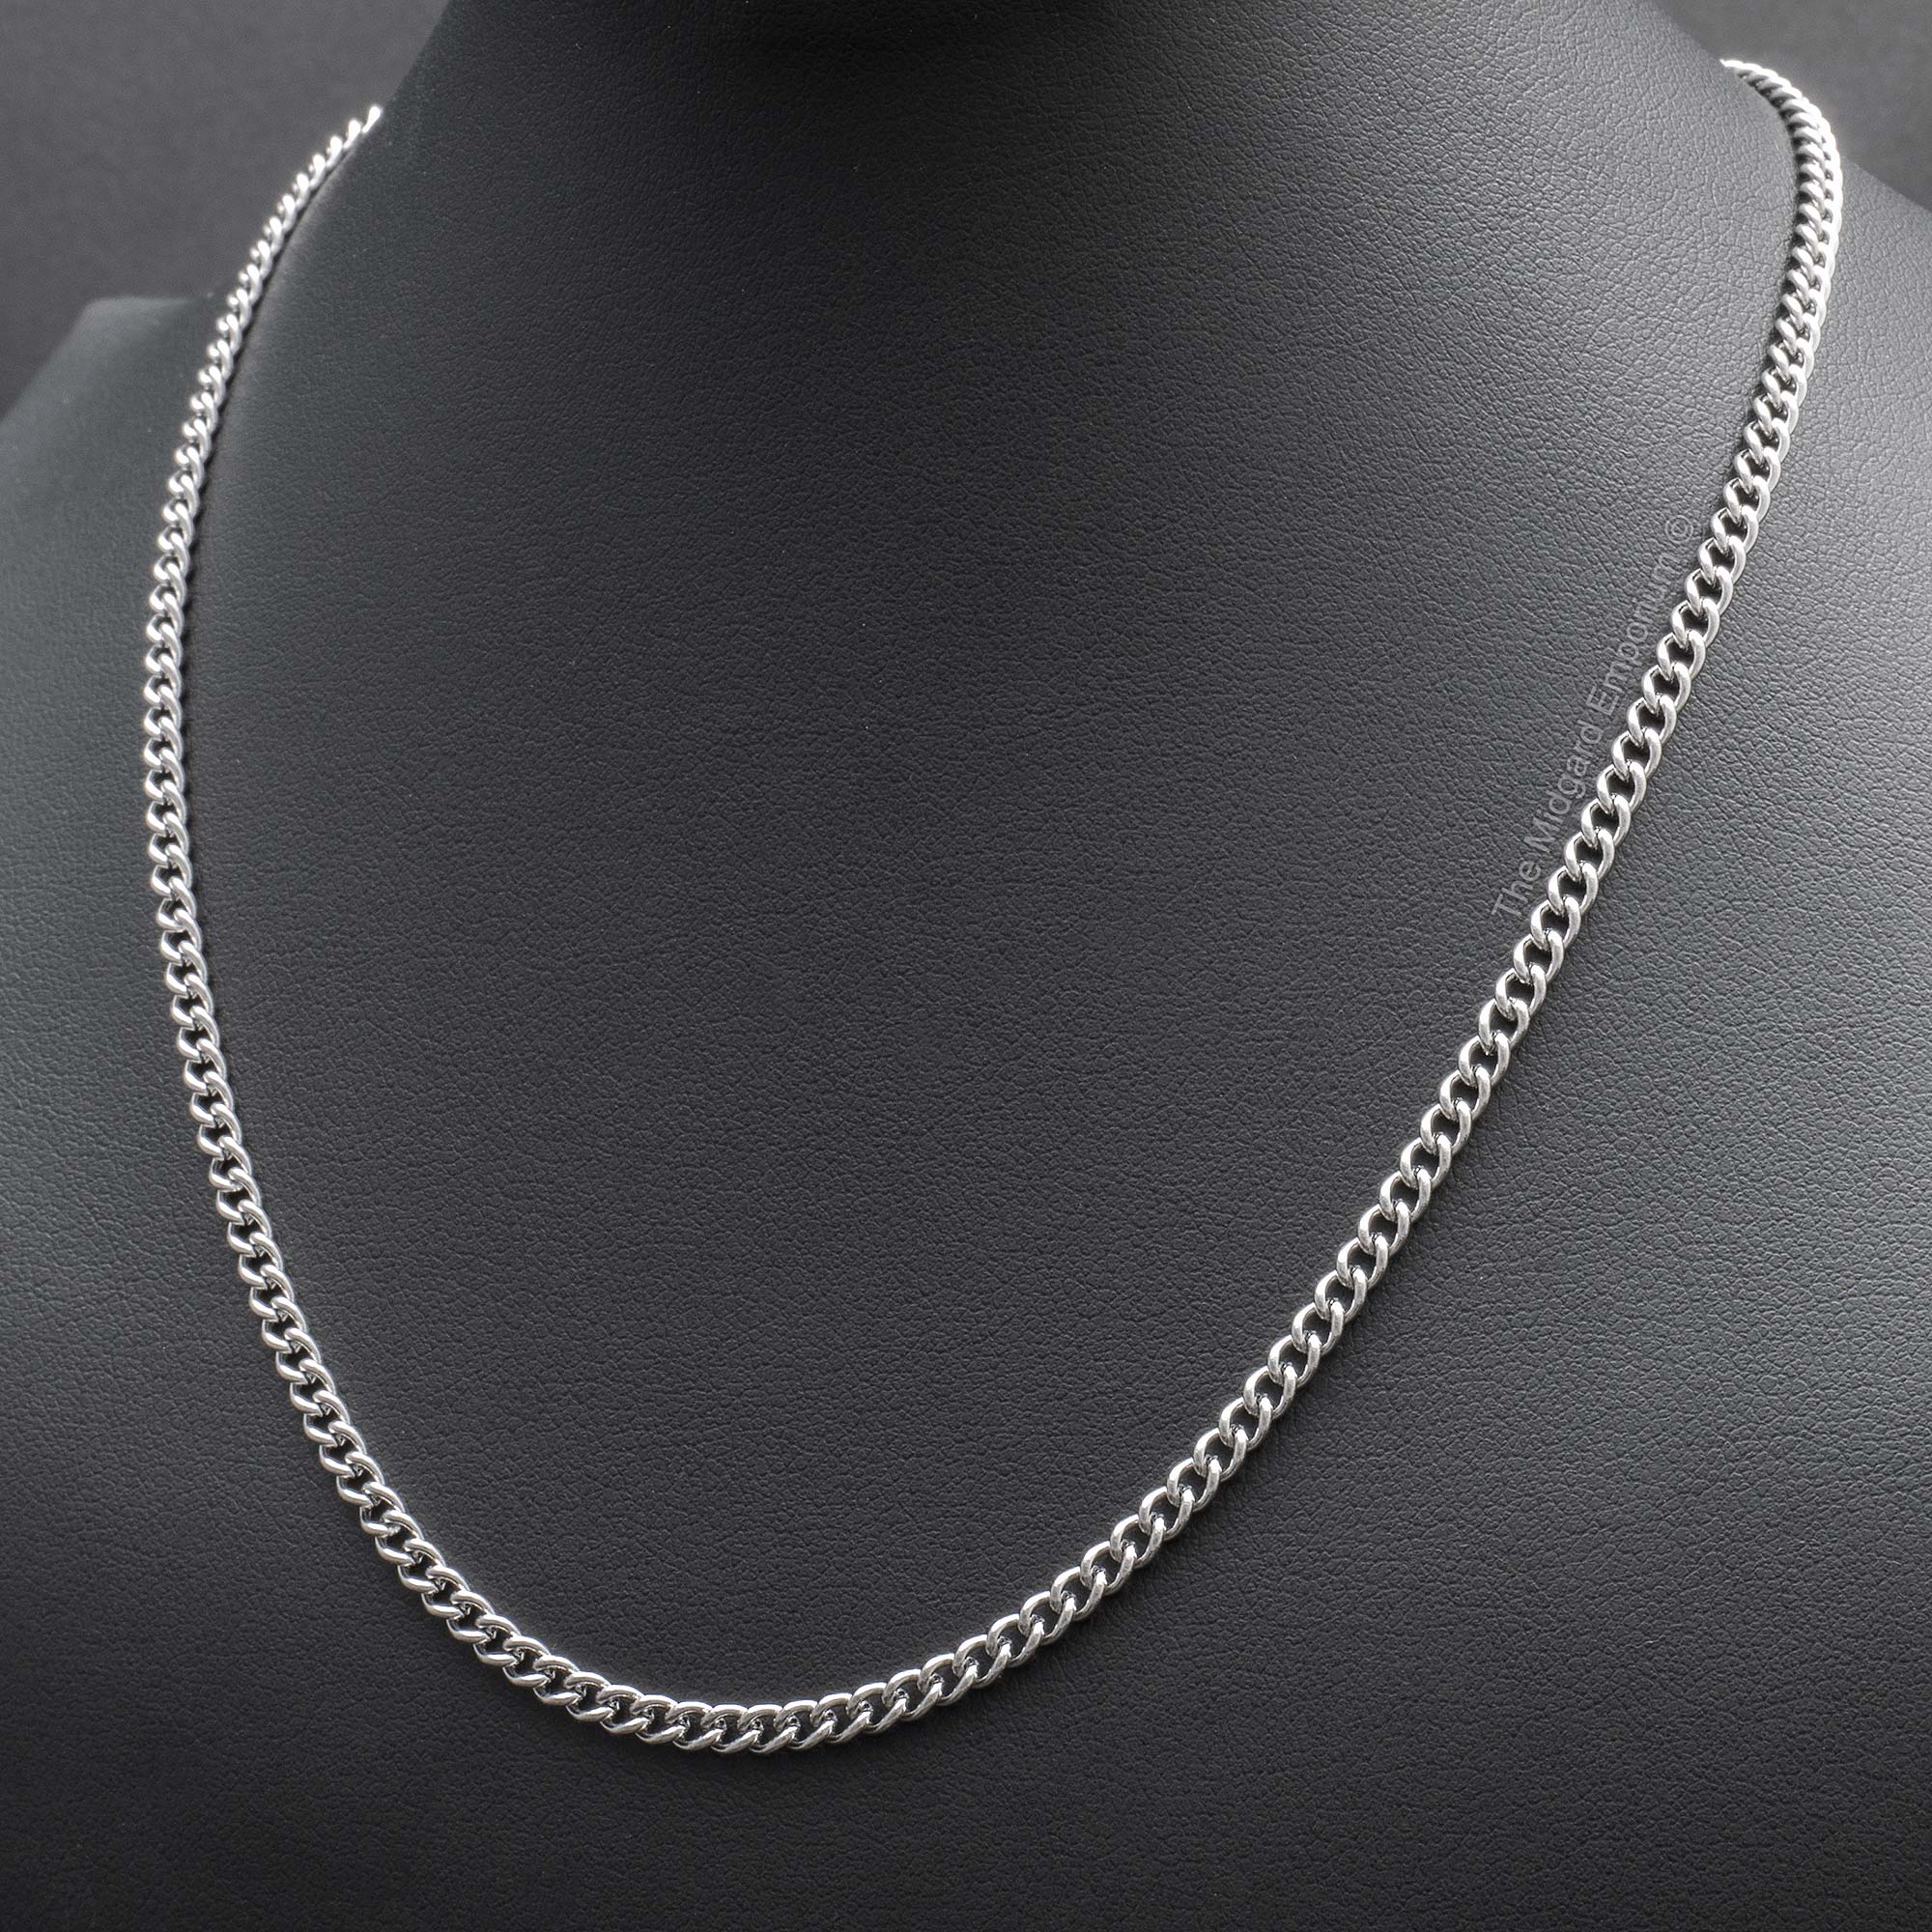 3mm Stainless Steel Curb Chain Necklace - The Midgard Emporium